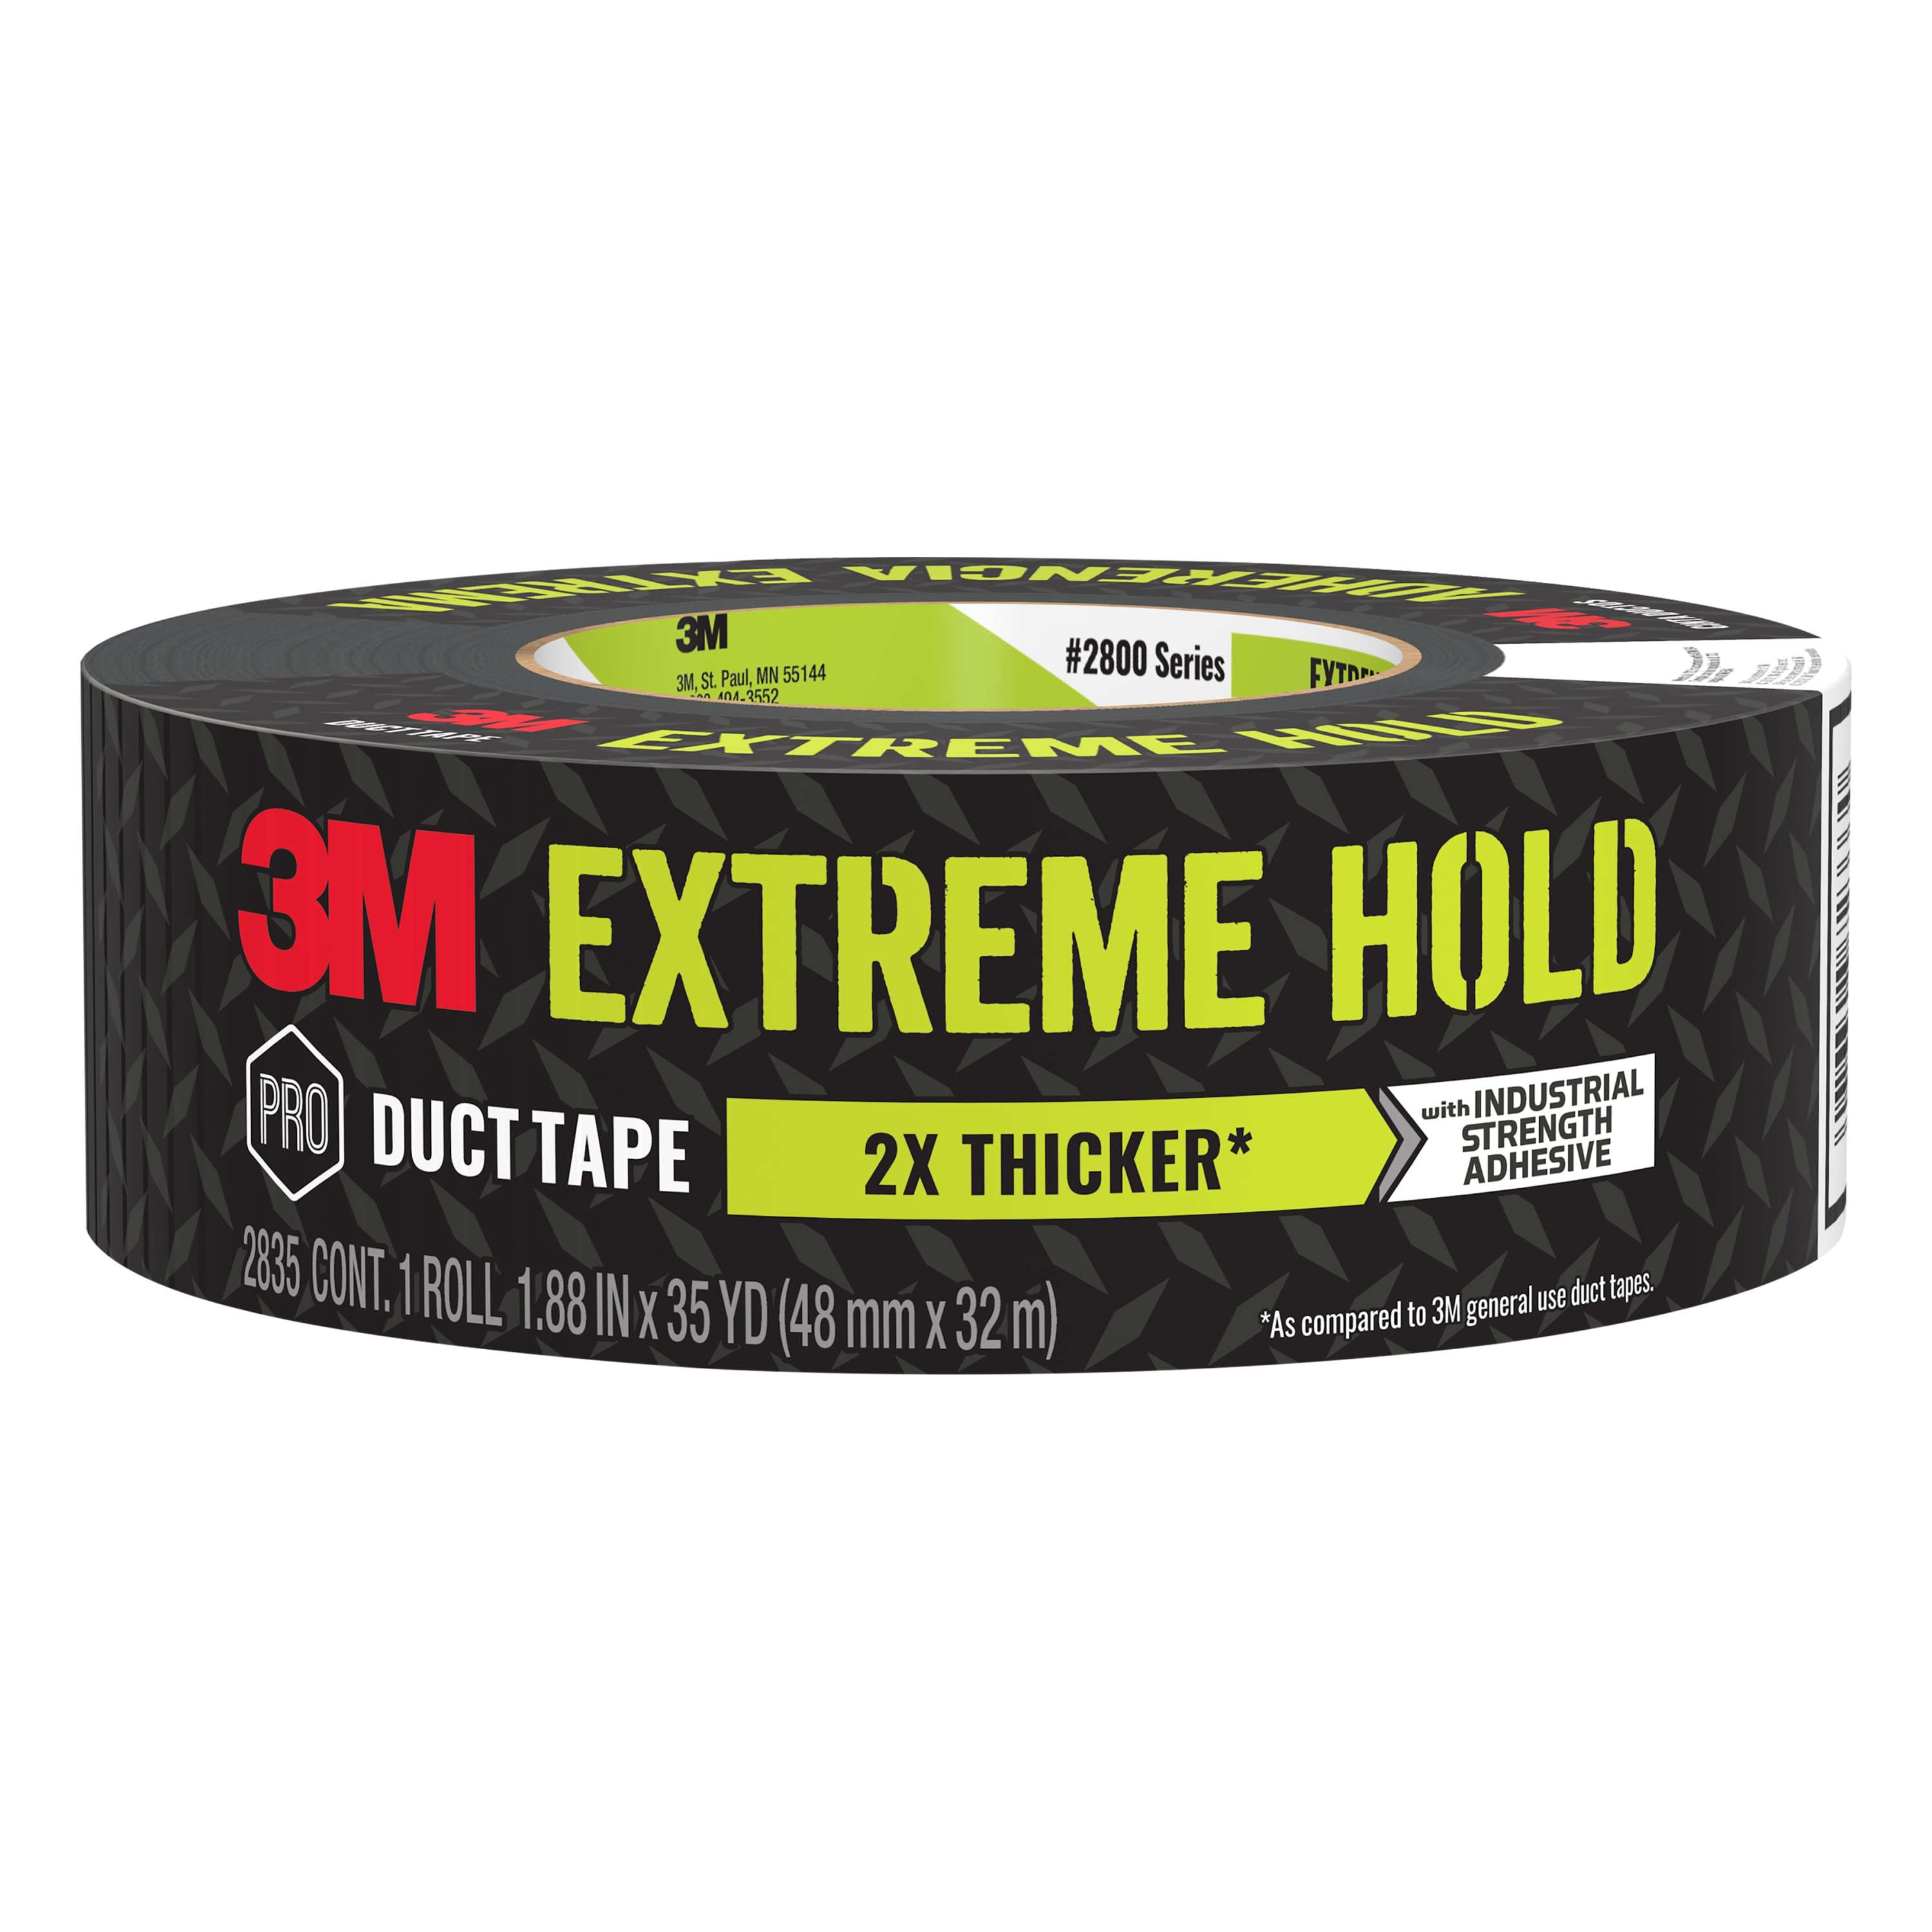 3M™ Extreme Hold Duct Tape, 2835-B, 1.88 in x 35 yd (48 mm x 32 m), 9
rolls/case